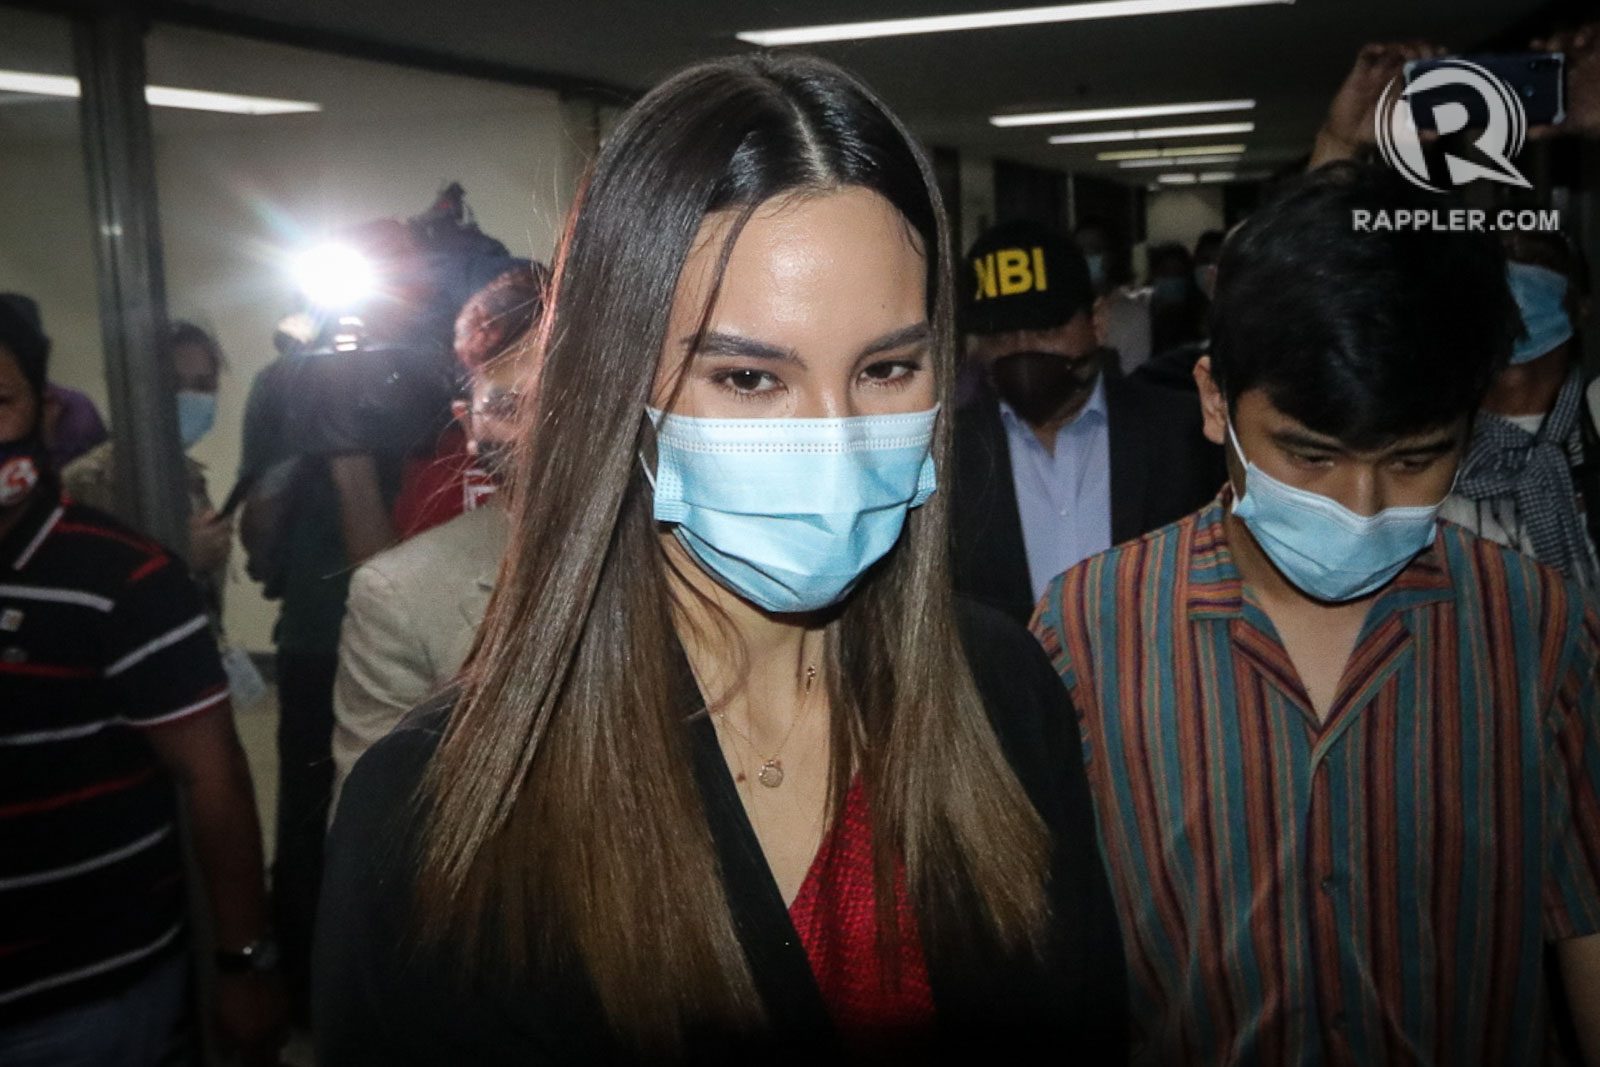 Catriona Gray seeks legal action against person spreading her fake nude photo online